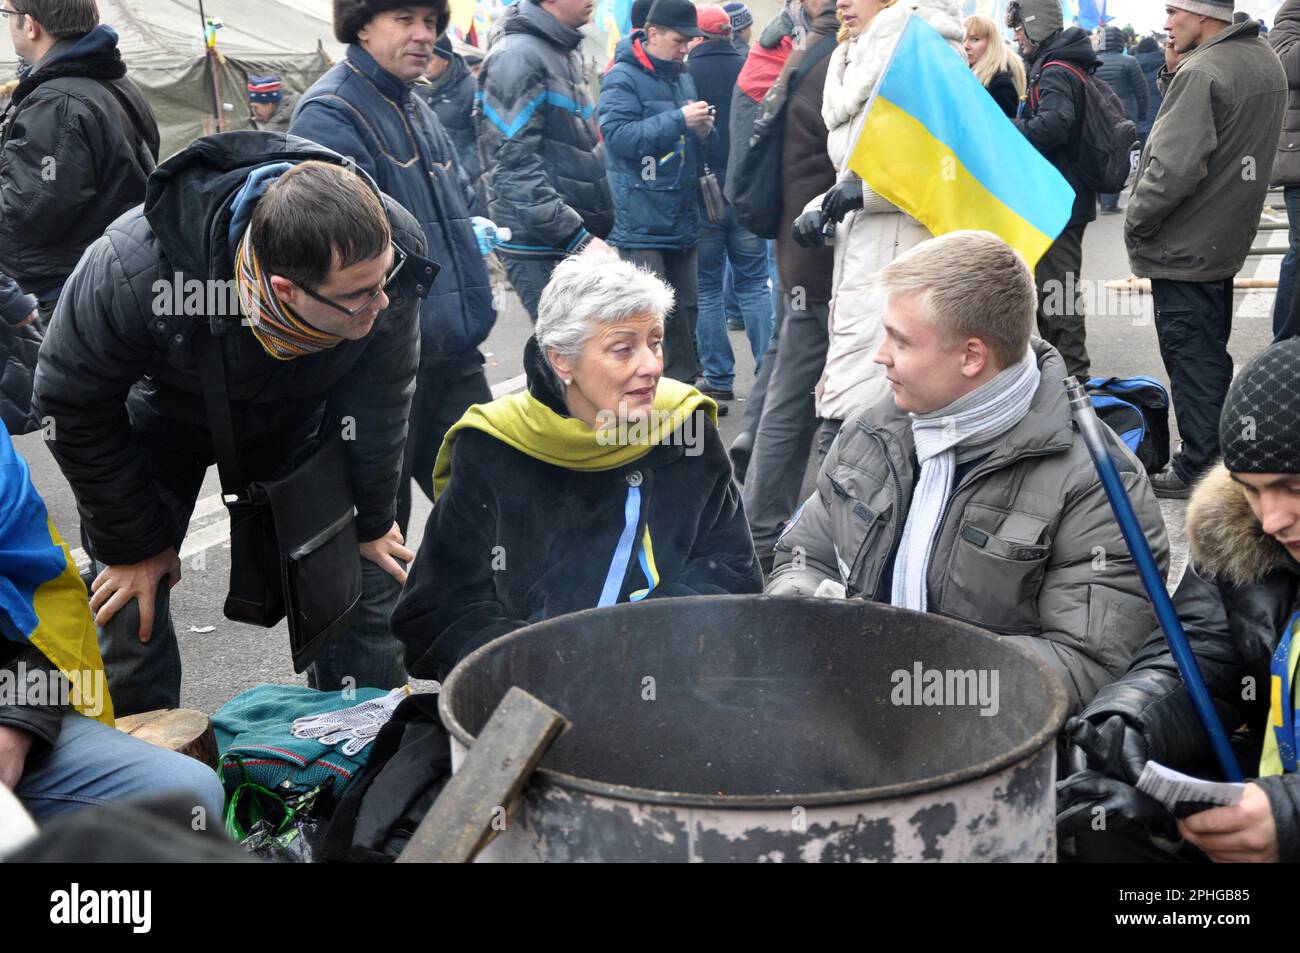 Kyiv - Ukraine - December 15, 2013. The events of the Revolution of Dignity on the Euromaidan in the capital of Ukraine, Kyiv, in 2013 Stock Photo